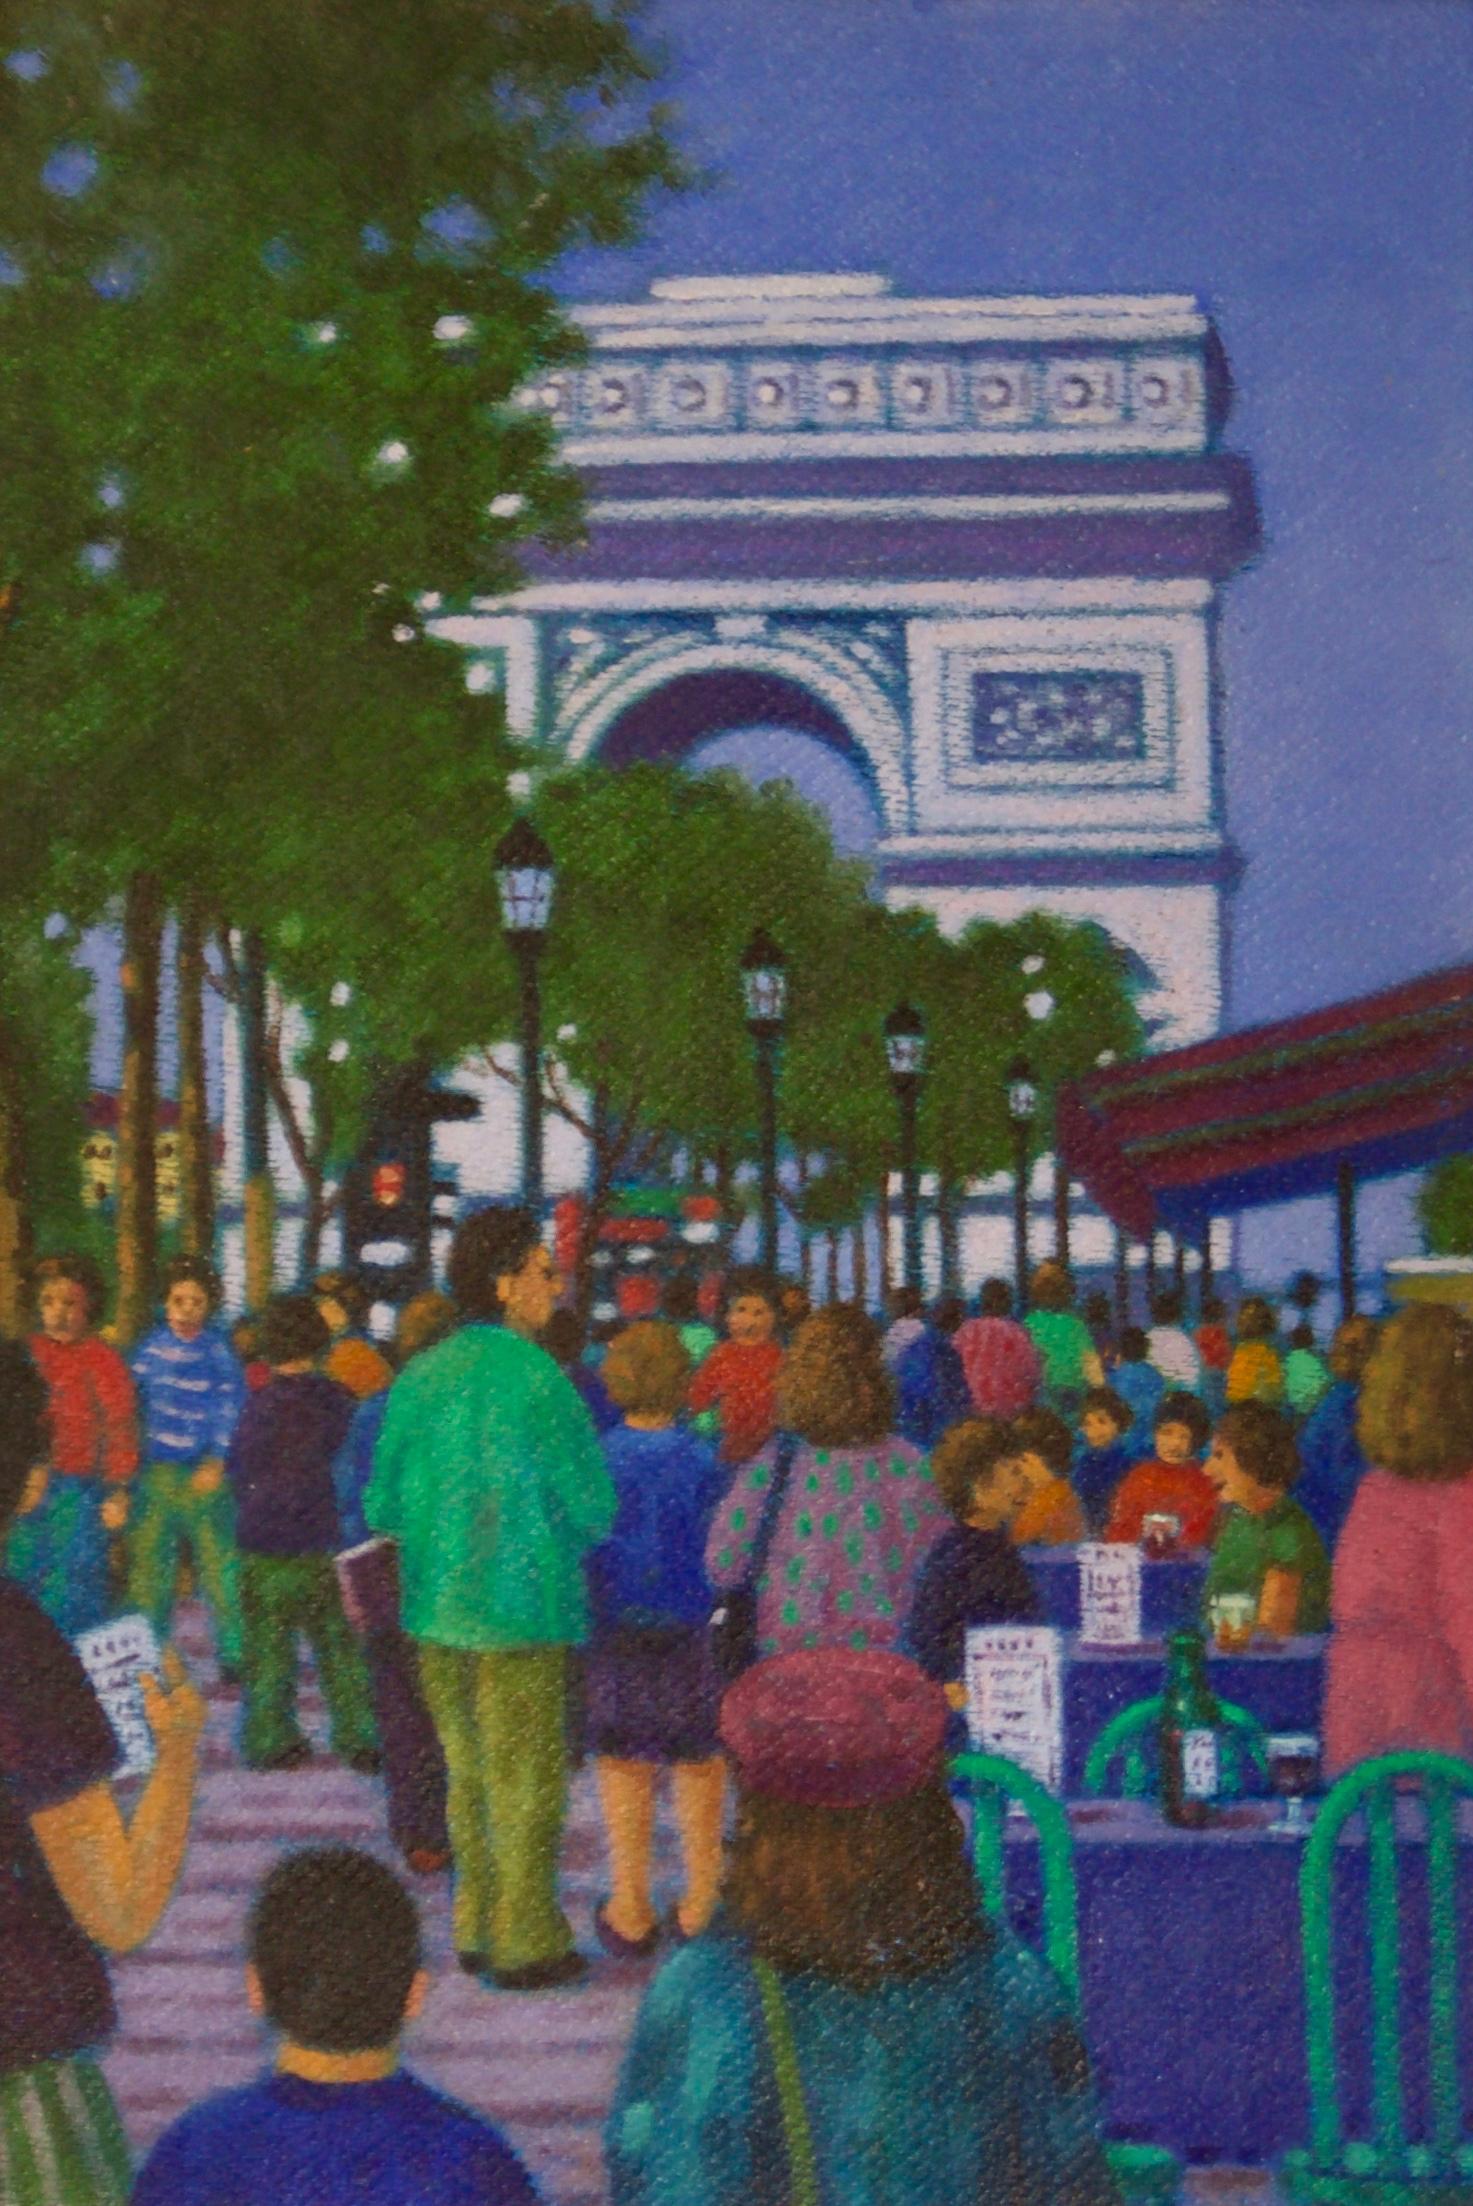 James B. Woods

Arc de Triomphe Paris - Late 20th Century Impressionist Oil by James B. Woods 

Created with oil and in a modern black wooden frame.

Keywords - Paris, France, post, arch, French landmark, restaurant, food, tables, chairs, crowds,